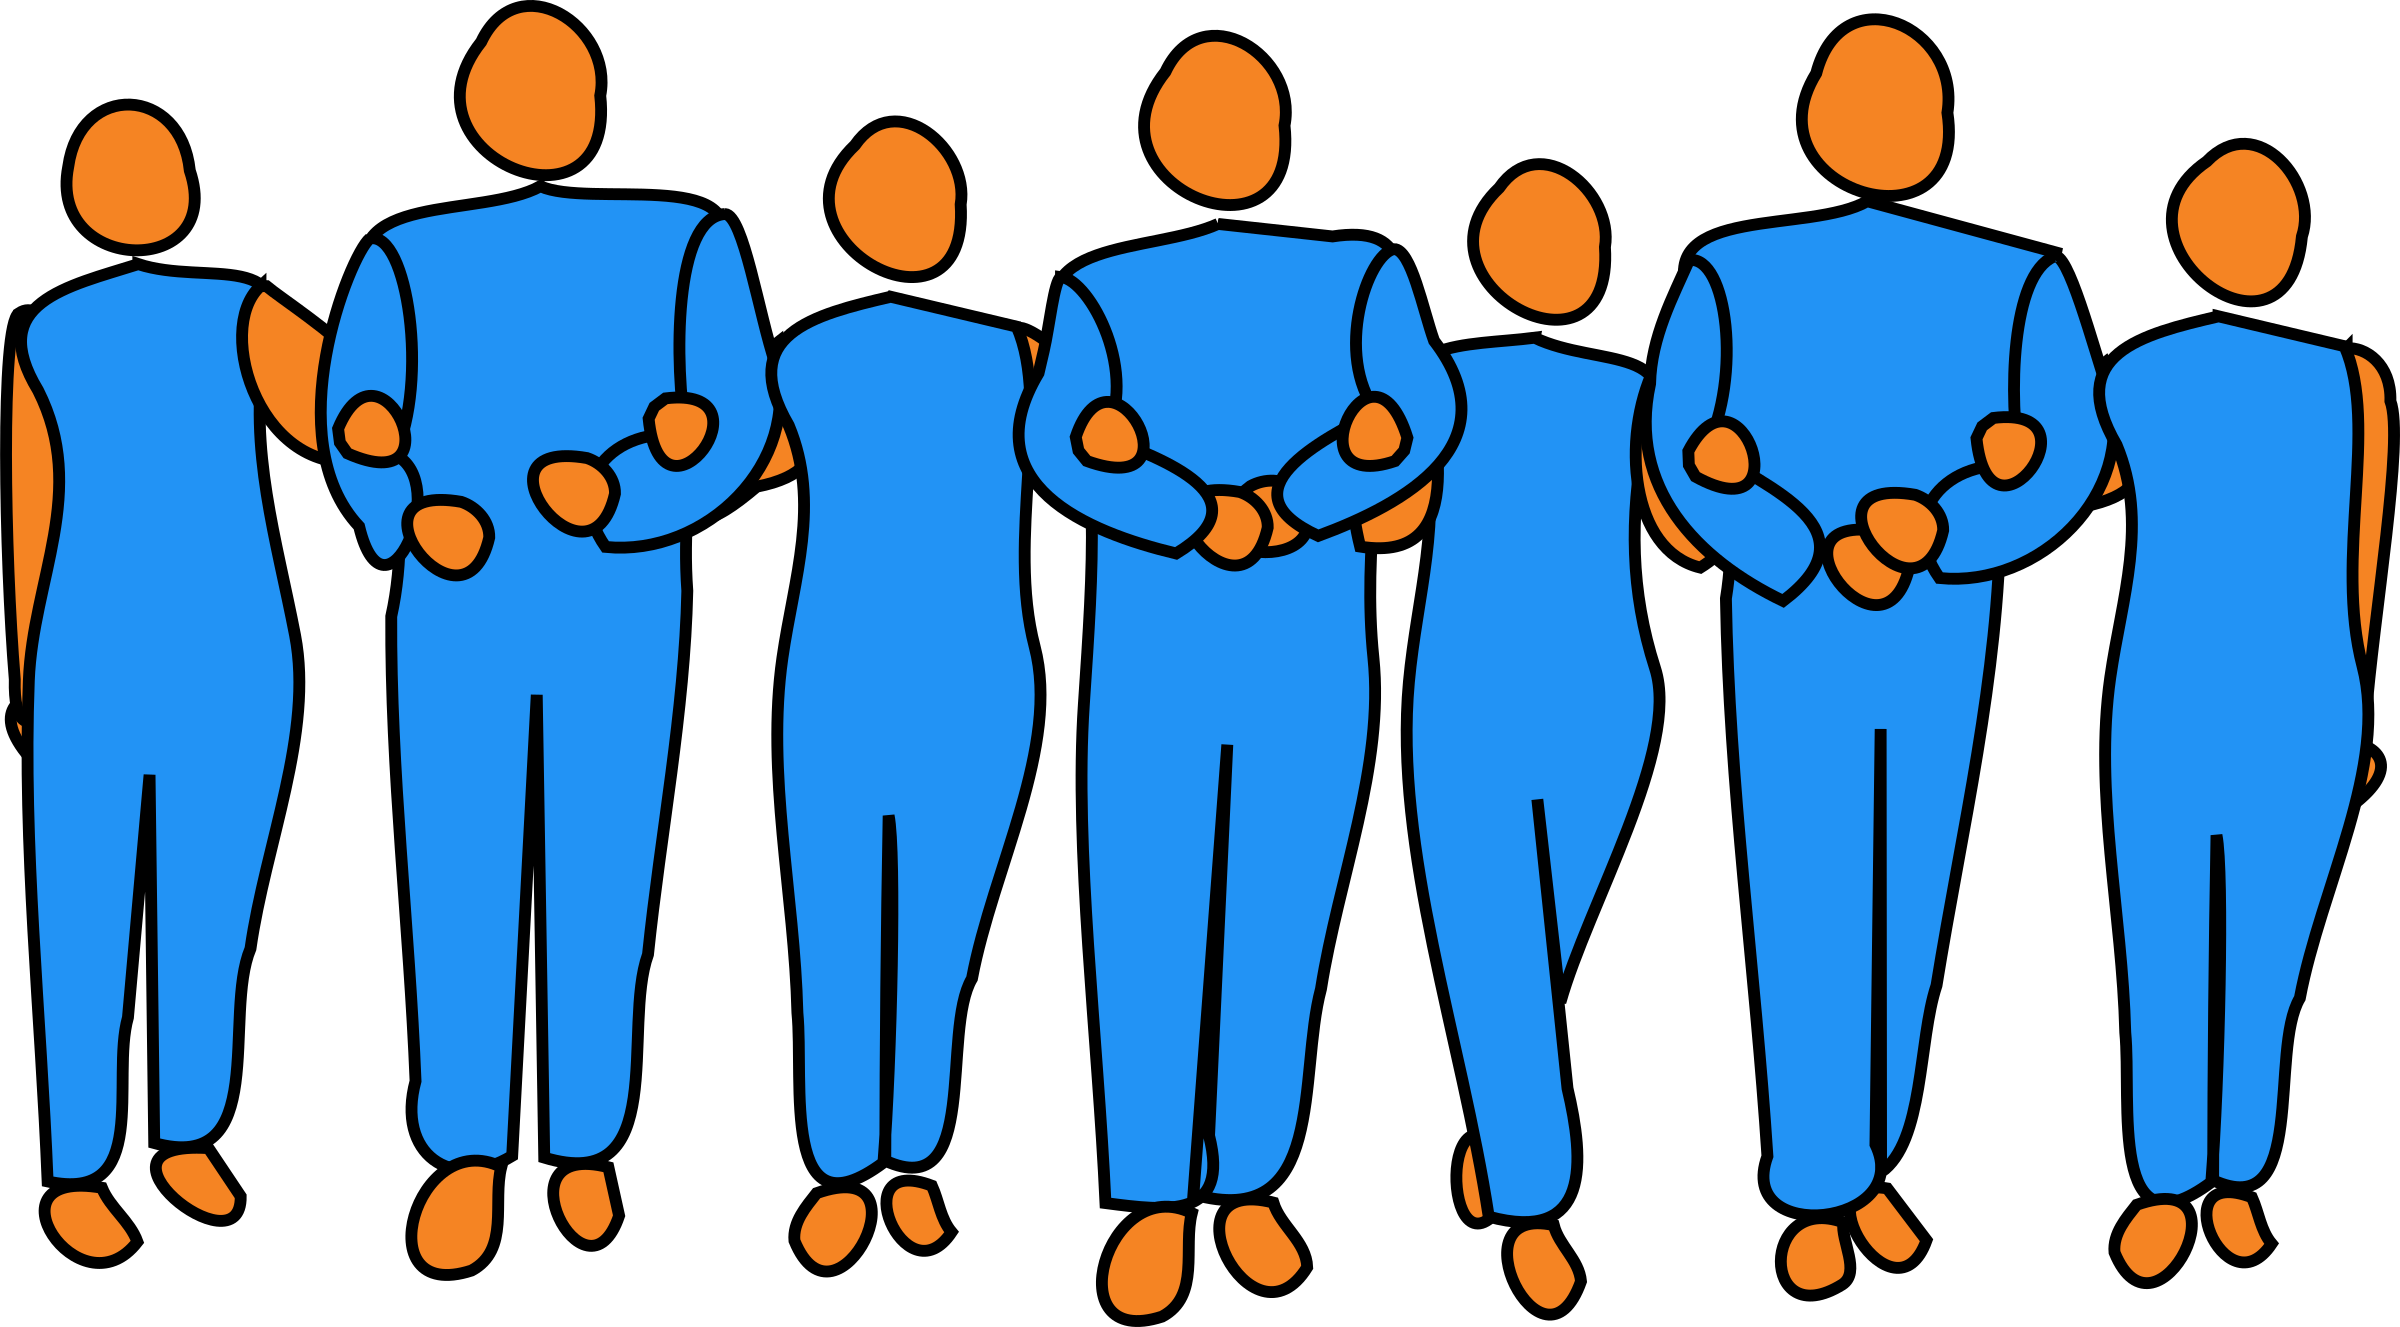 Download Clipart - Teamwork - Cartoon People Linking Arms PNG Image with No  Background 